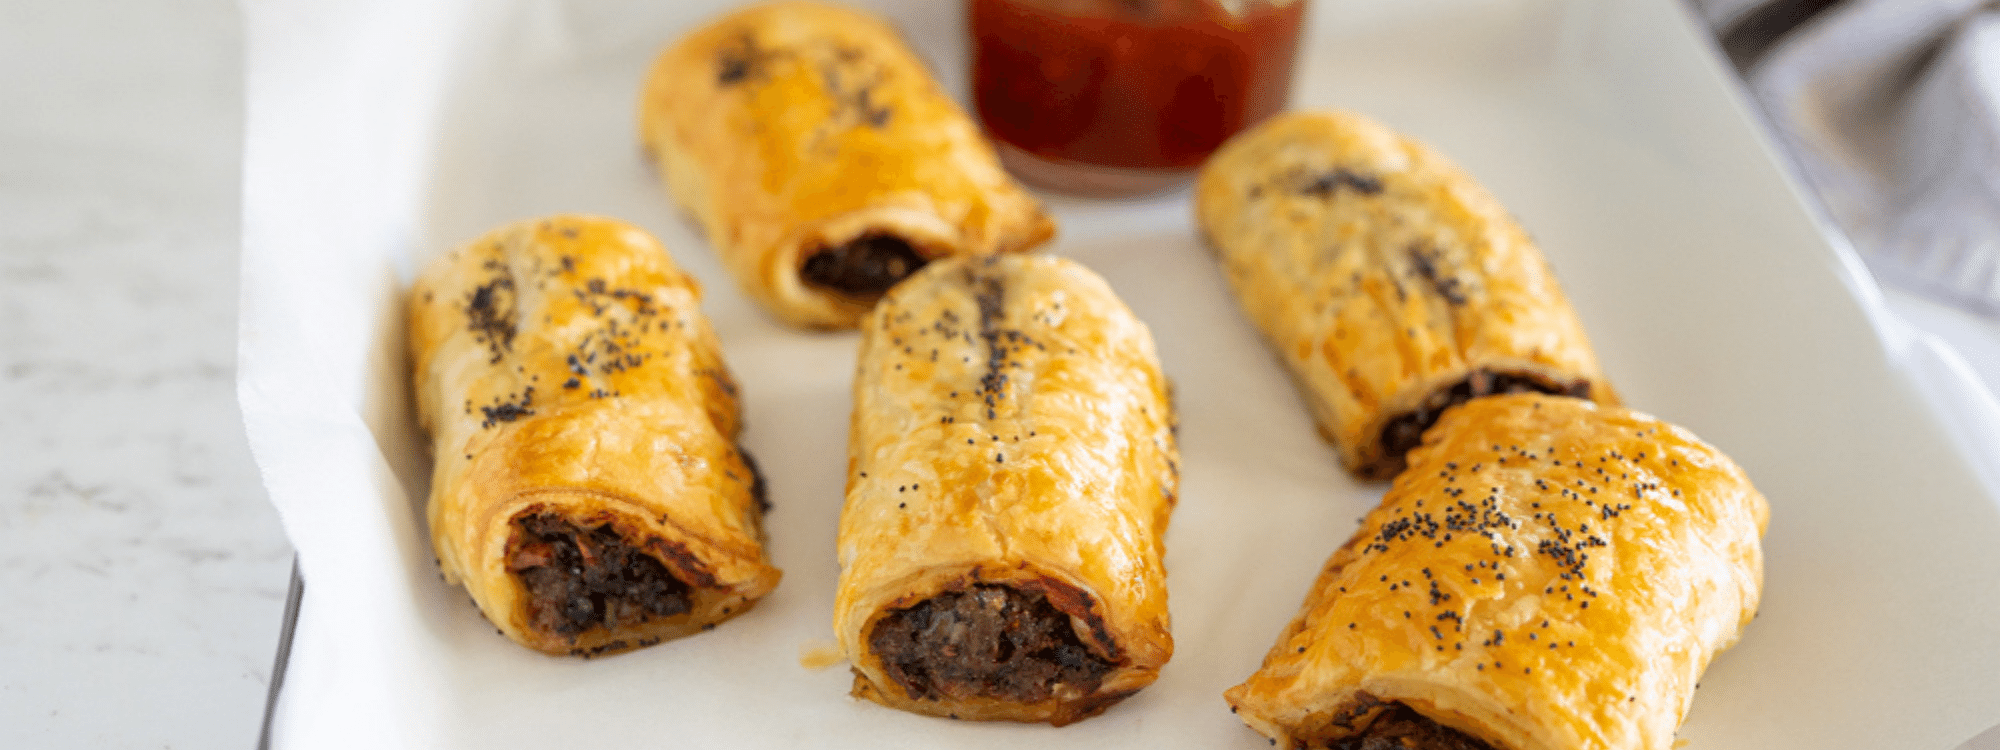 The Blend – Lamb and Mushroom Blended Sausage Rolls